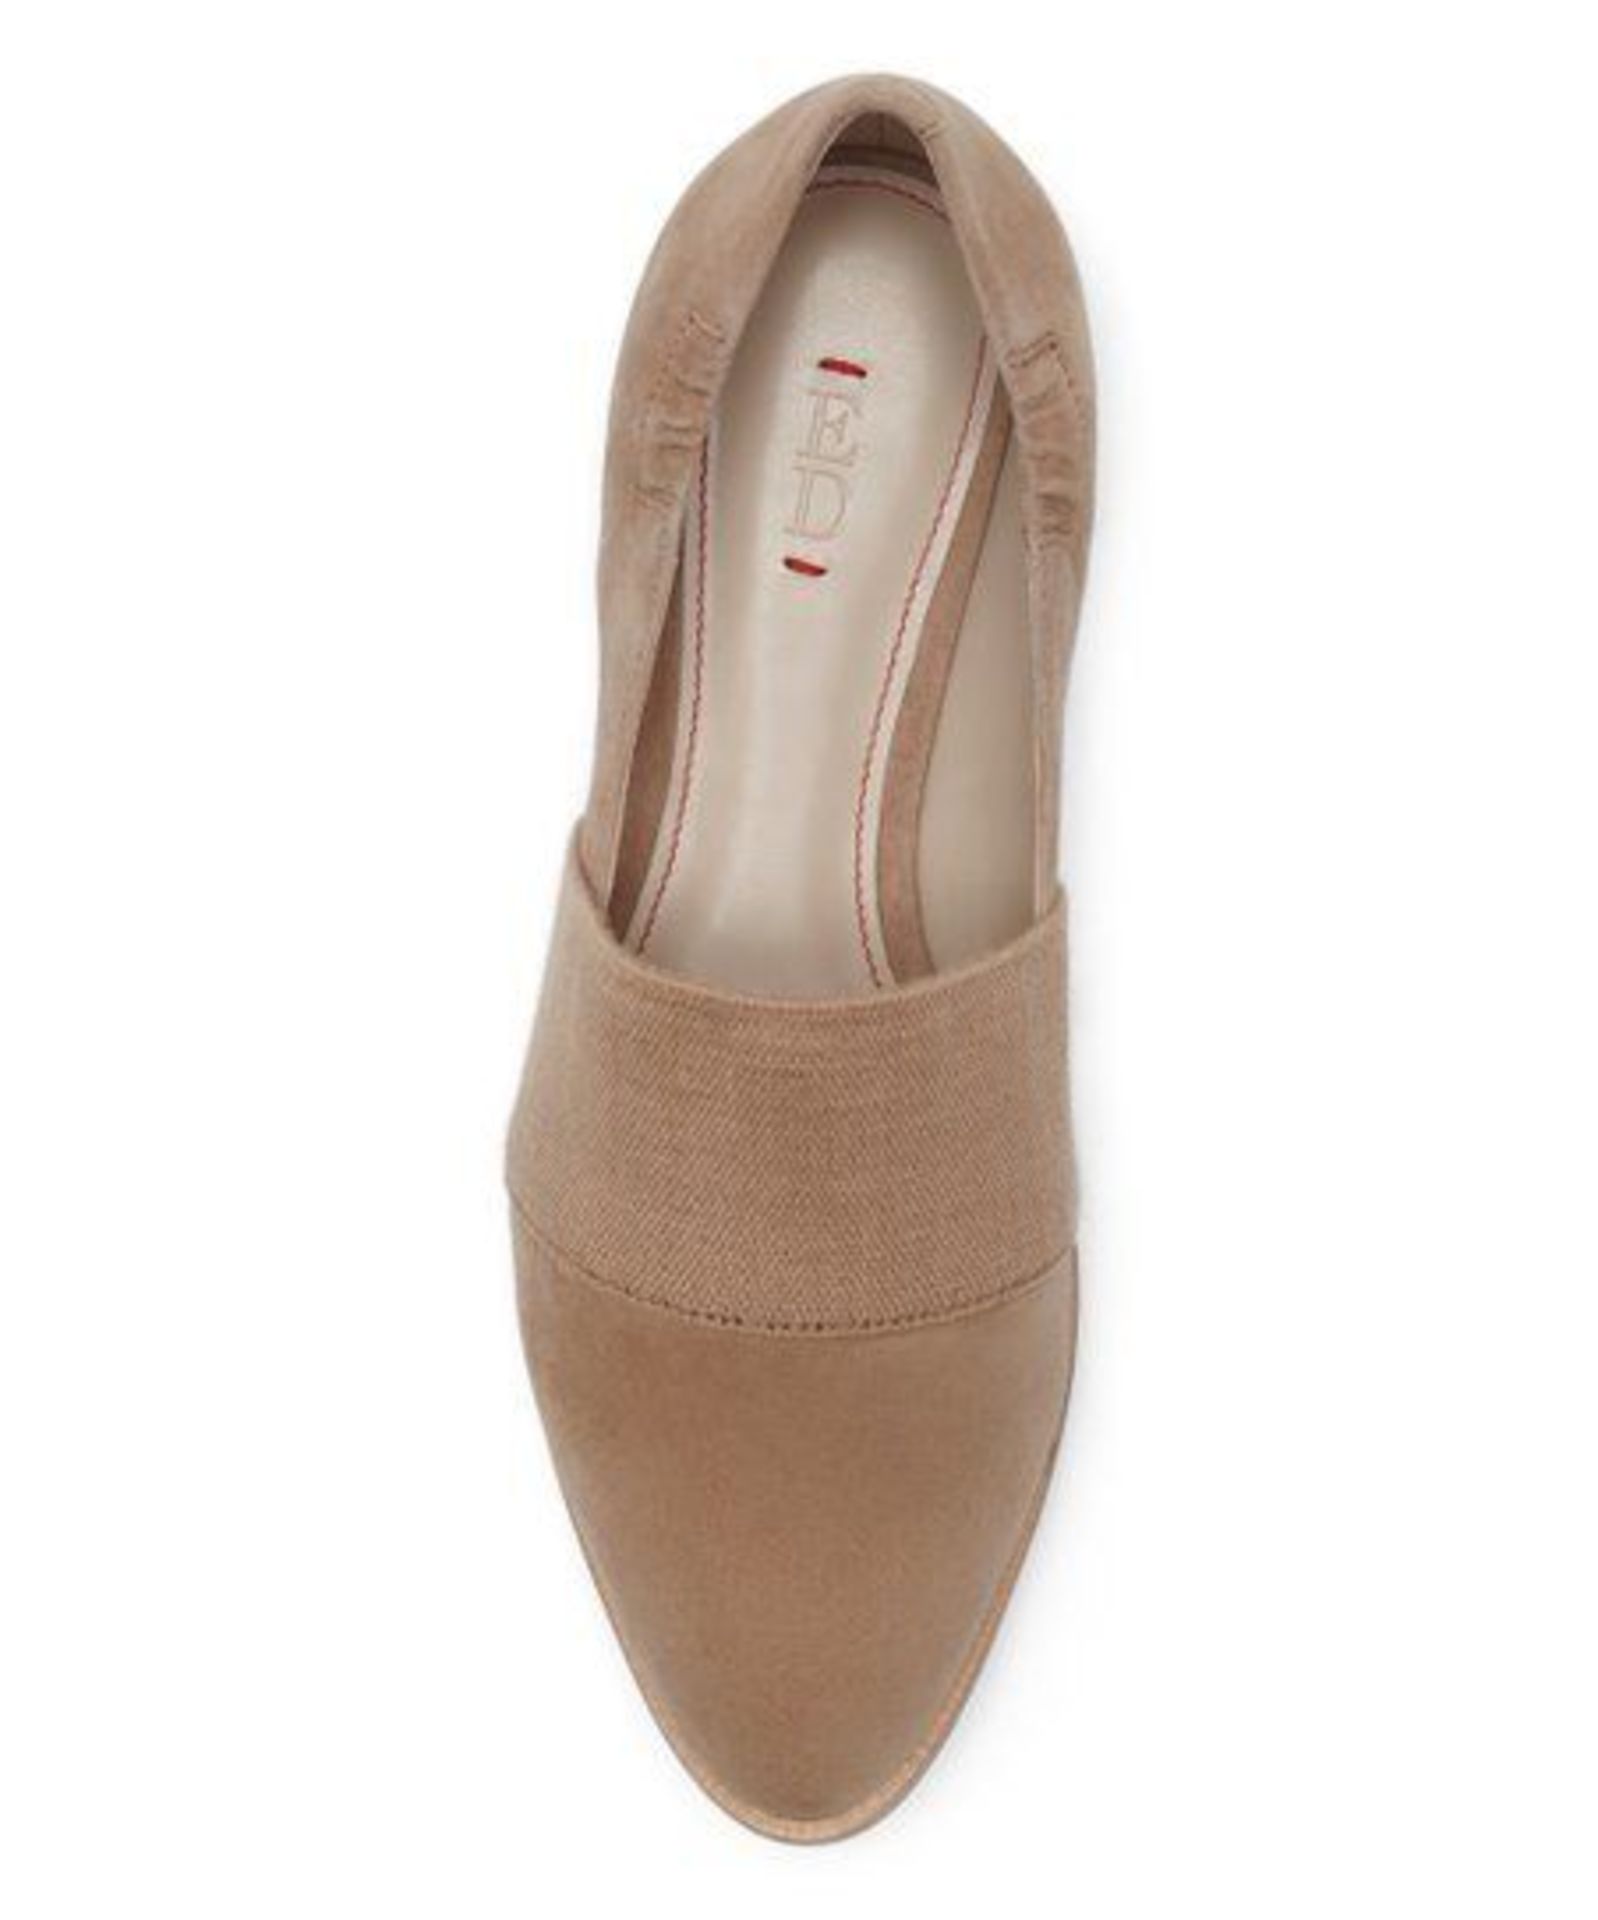 Ed By Ellen Degeneres, Sahara Karlin Leather Loafer - Women, Size Uk 4-4.5 Us 6. (New With Box) [ - Image 3 of 5